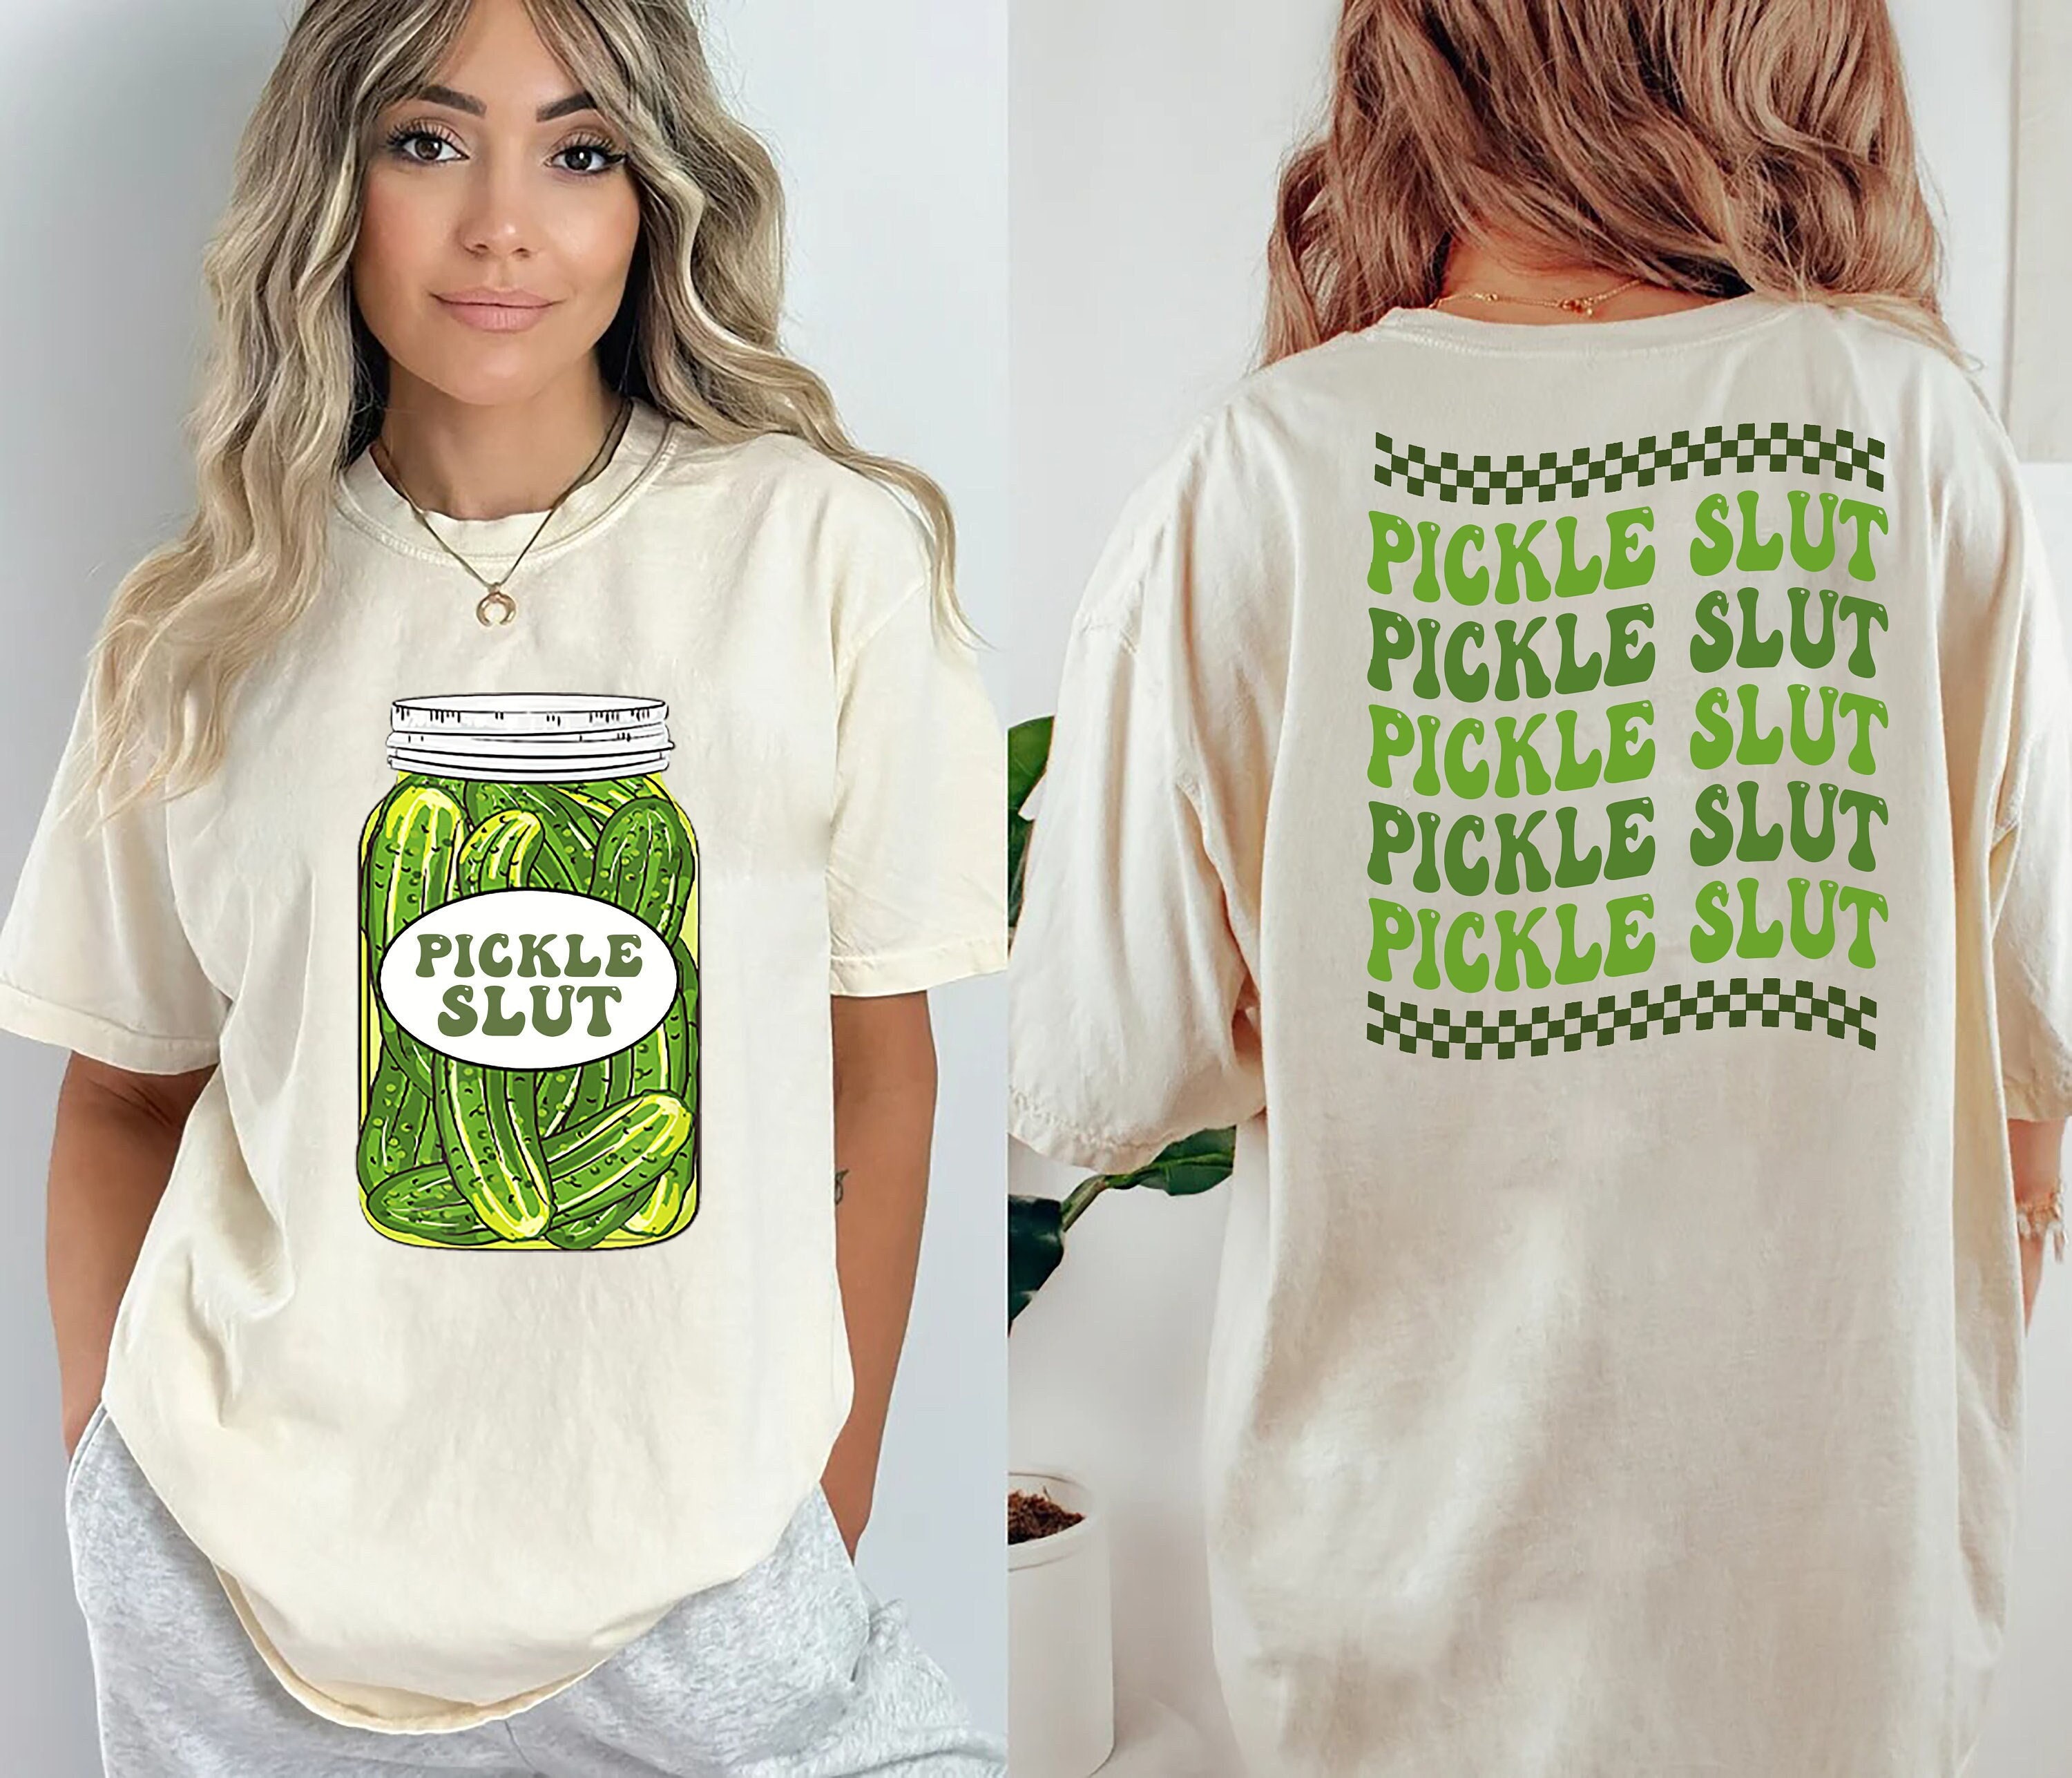 How to Design a Pickle Shirt on Your Own: A DIY Guide